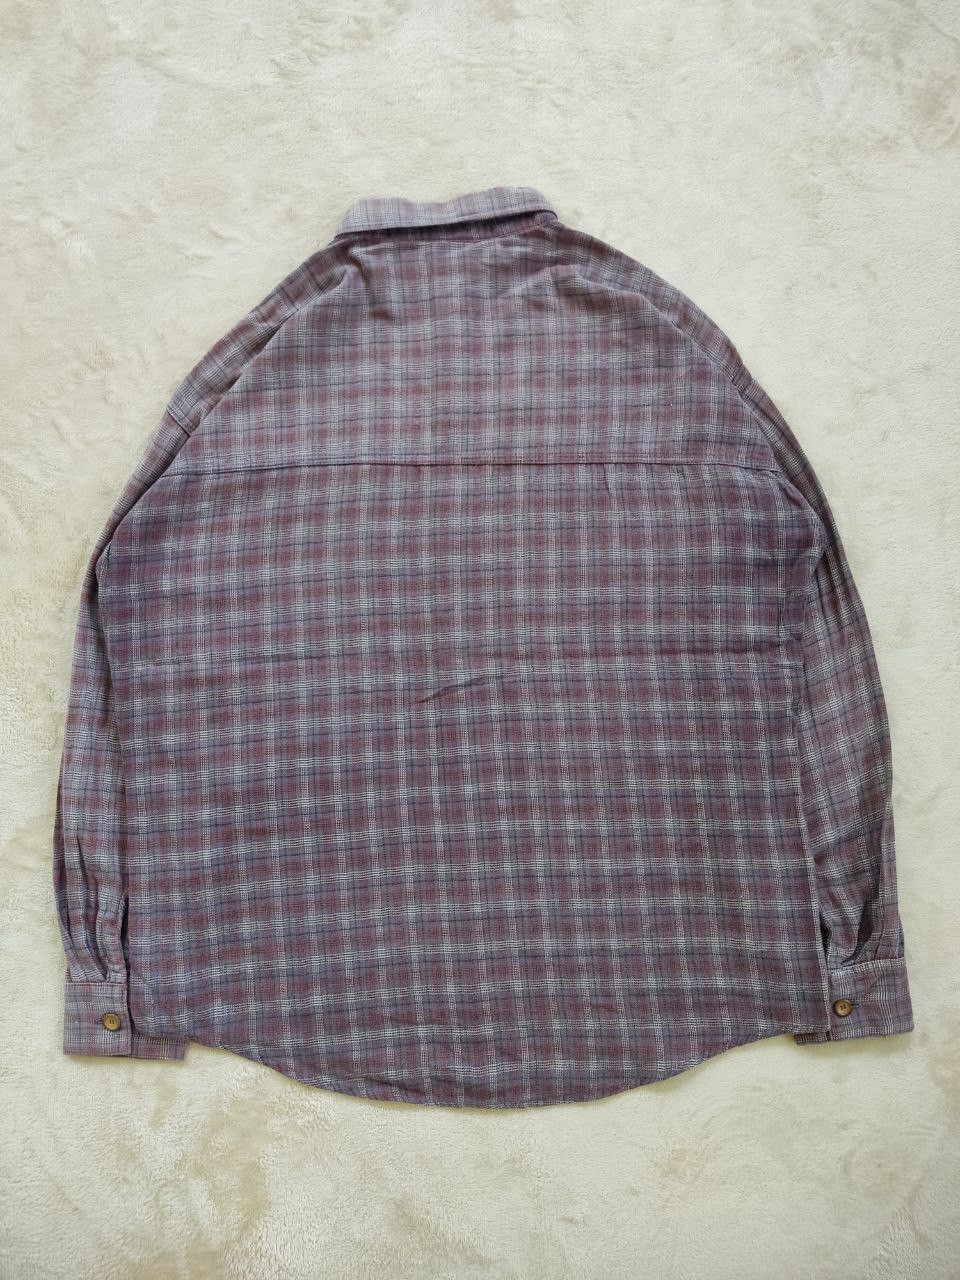 Vintage 90s No Fear Made in USA Old Skool Plaid Shirt - 3